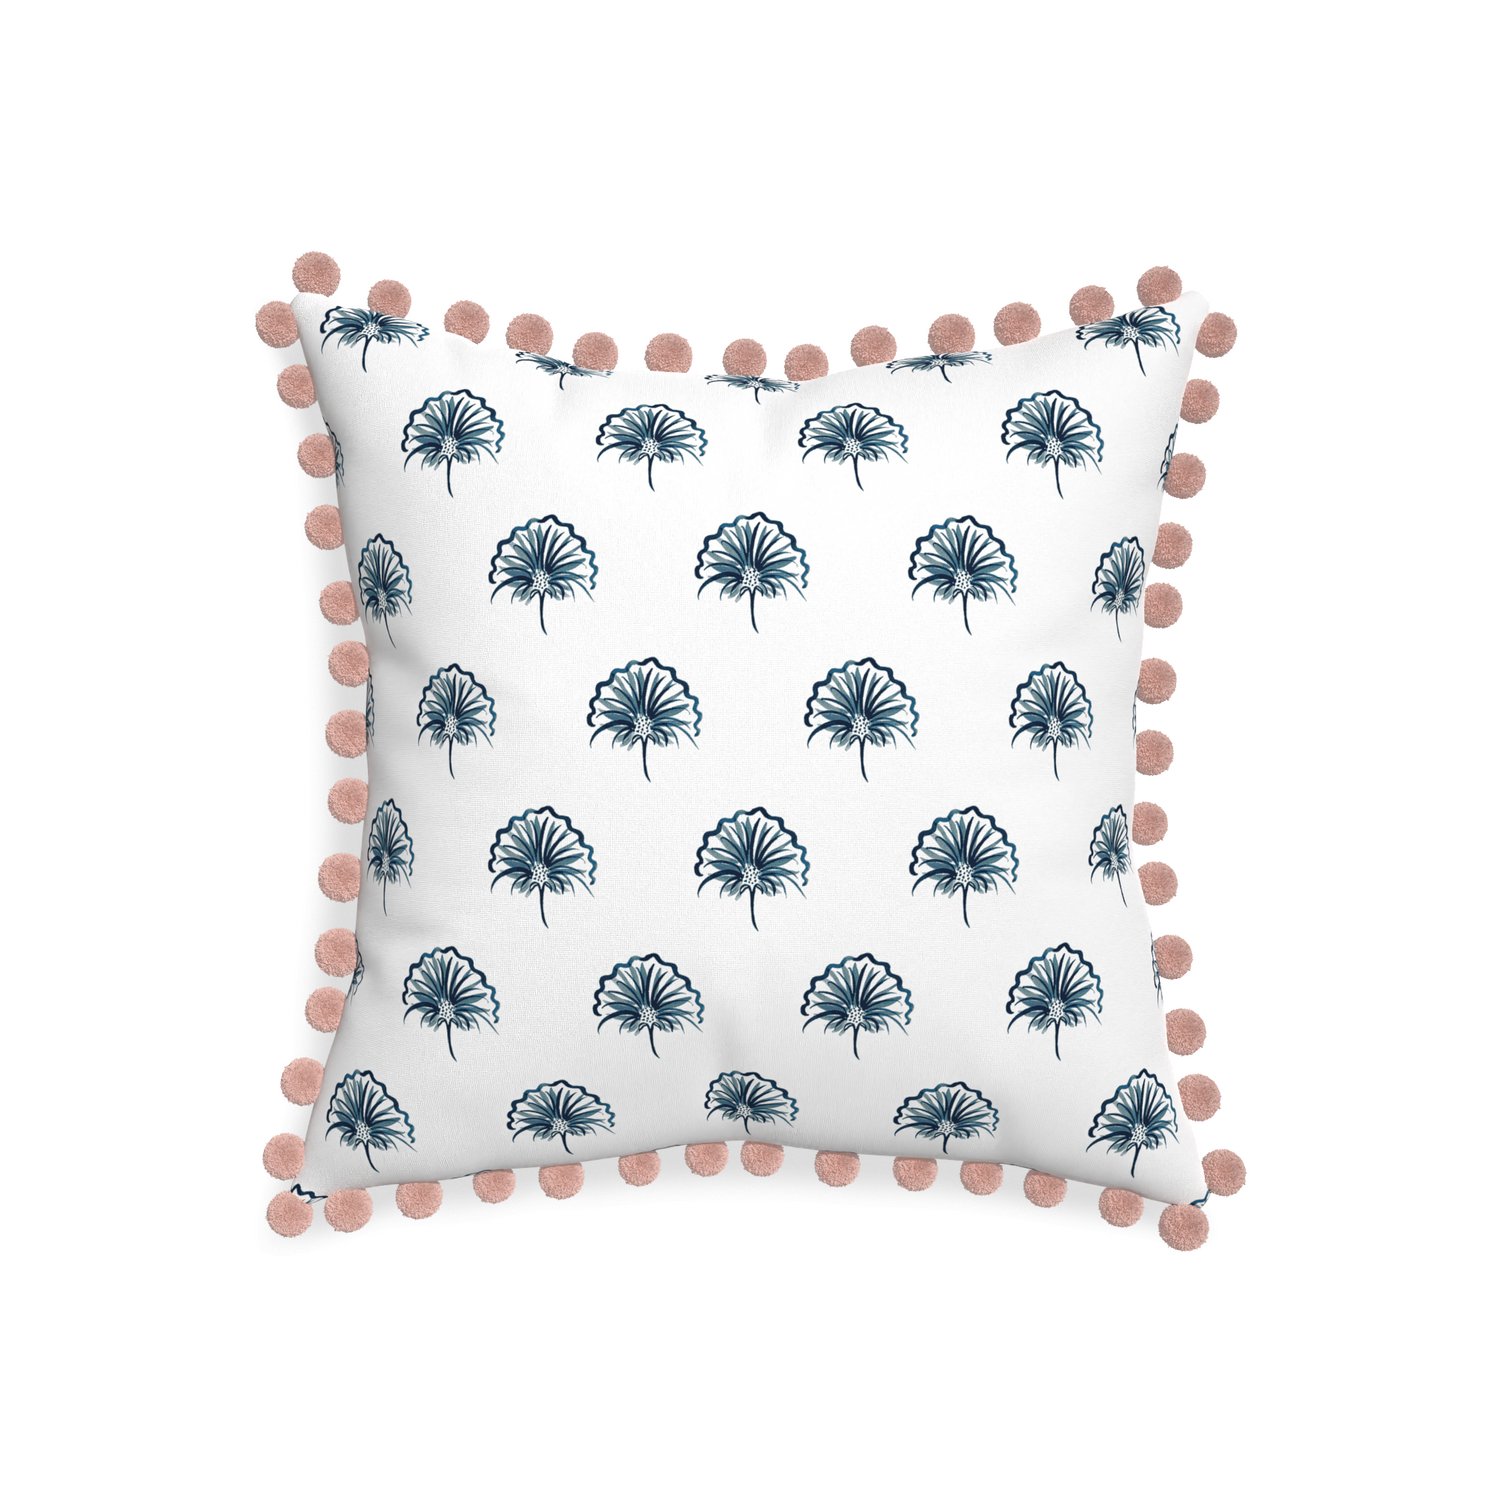 20-square penelope midnight custom floral navypillow with rose pom pom on white background